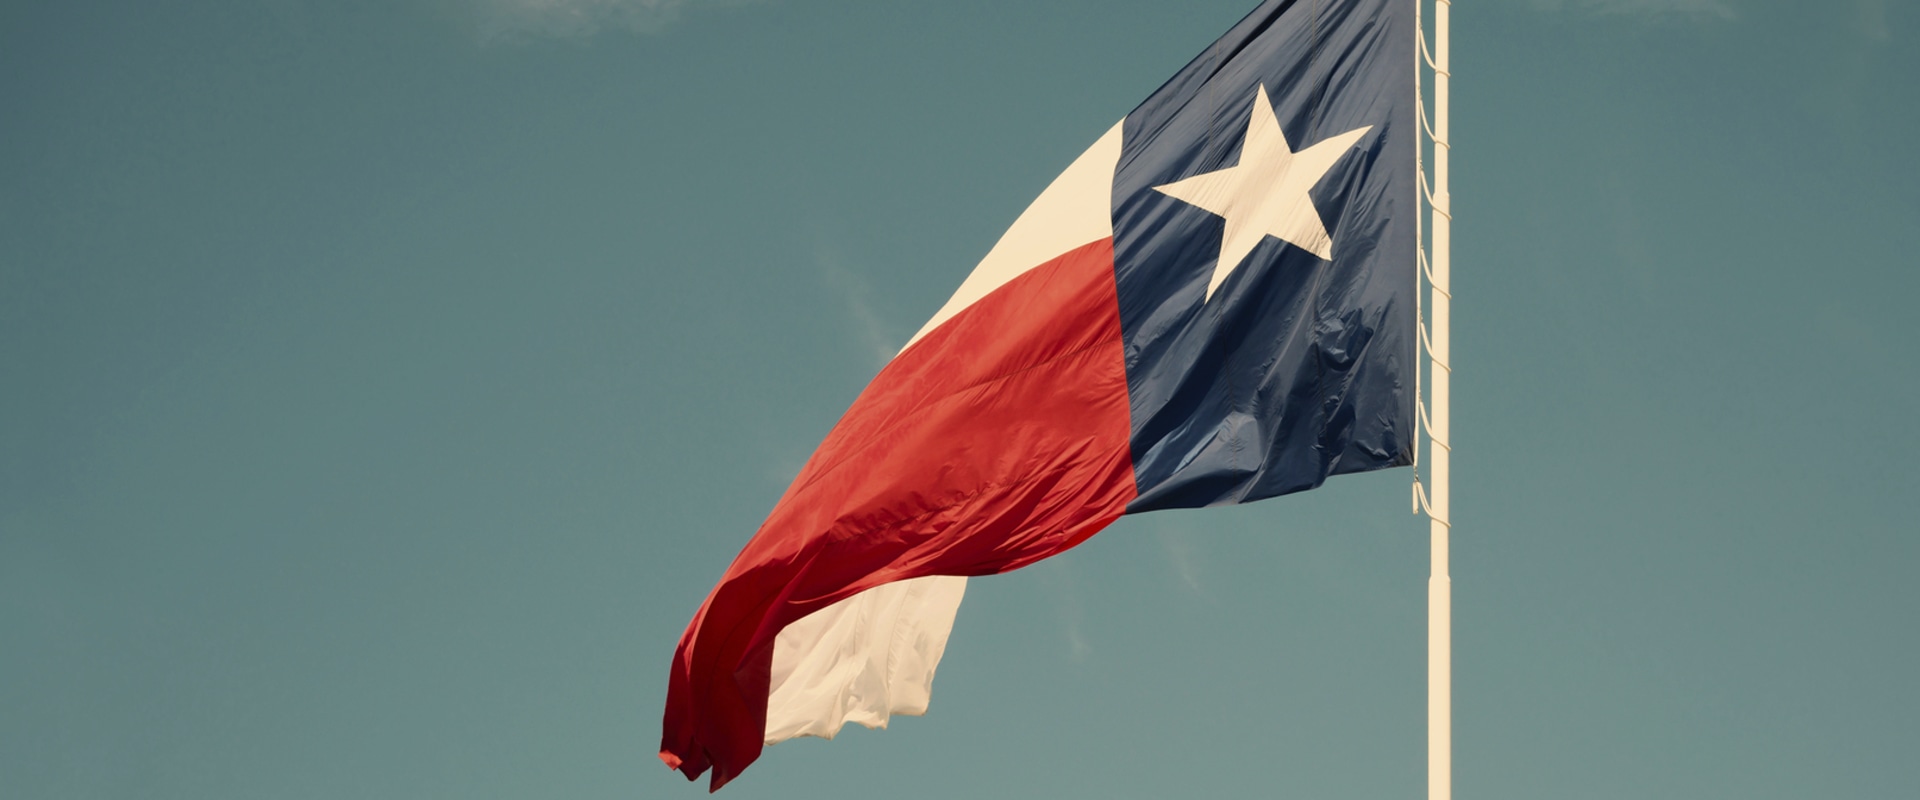 What makes texas the best state?